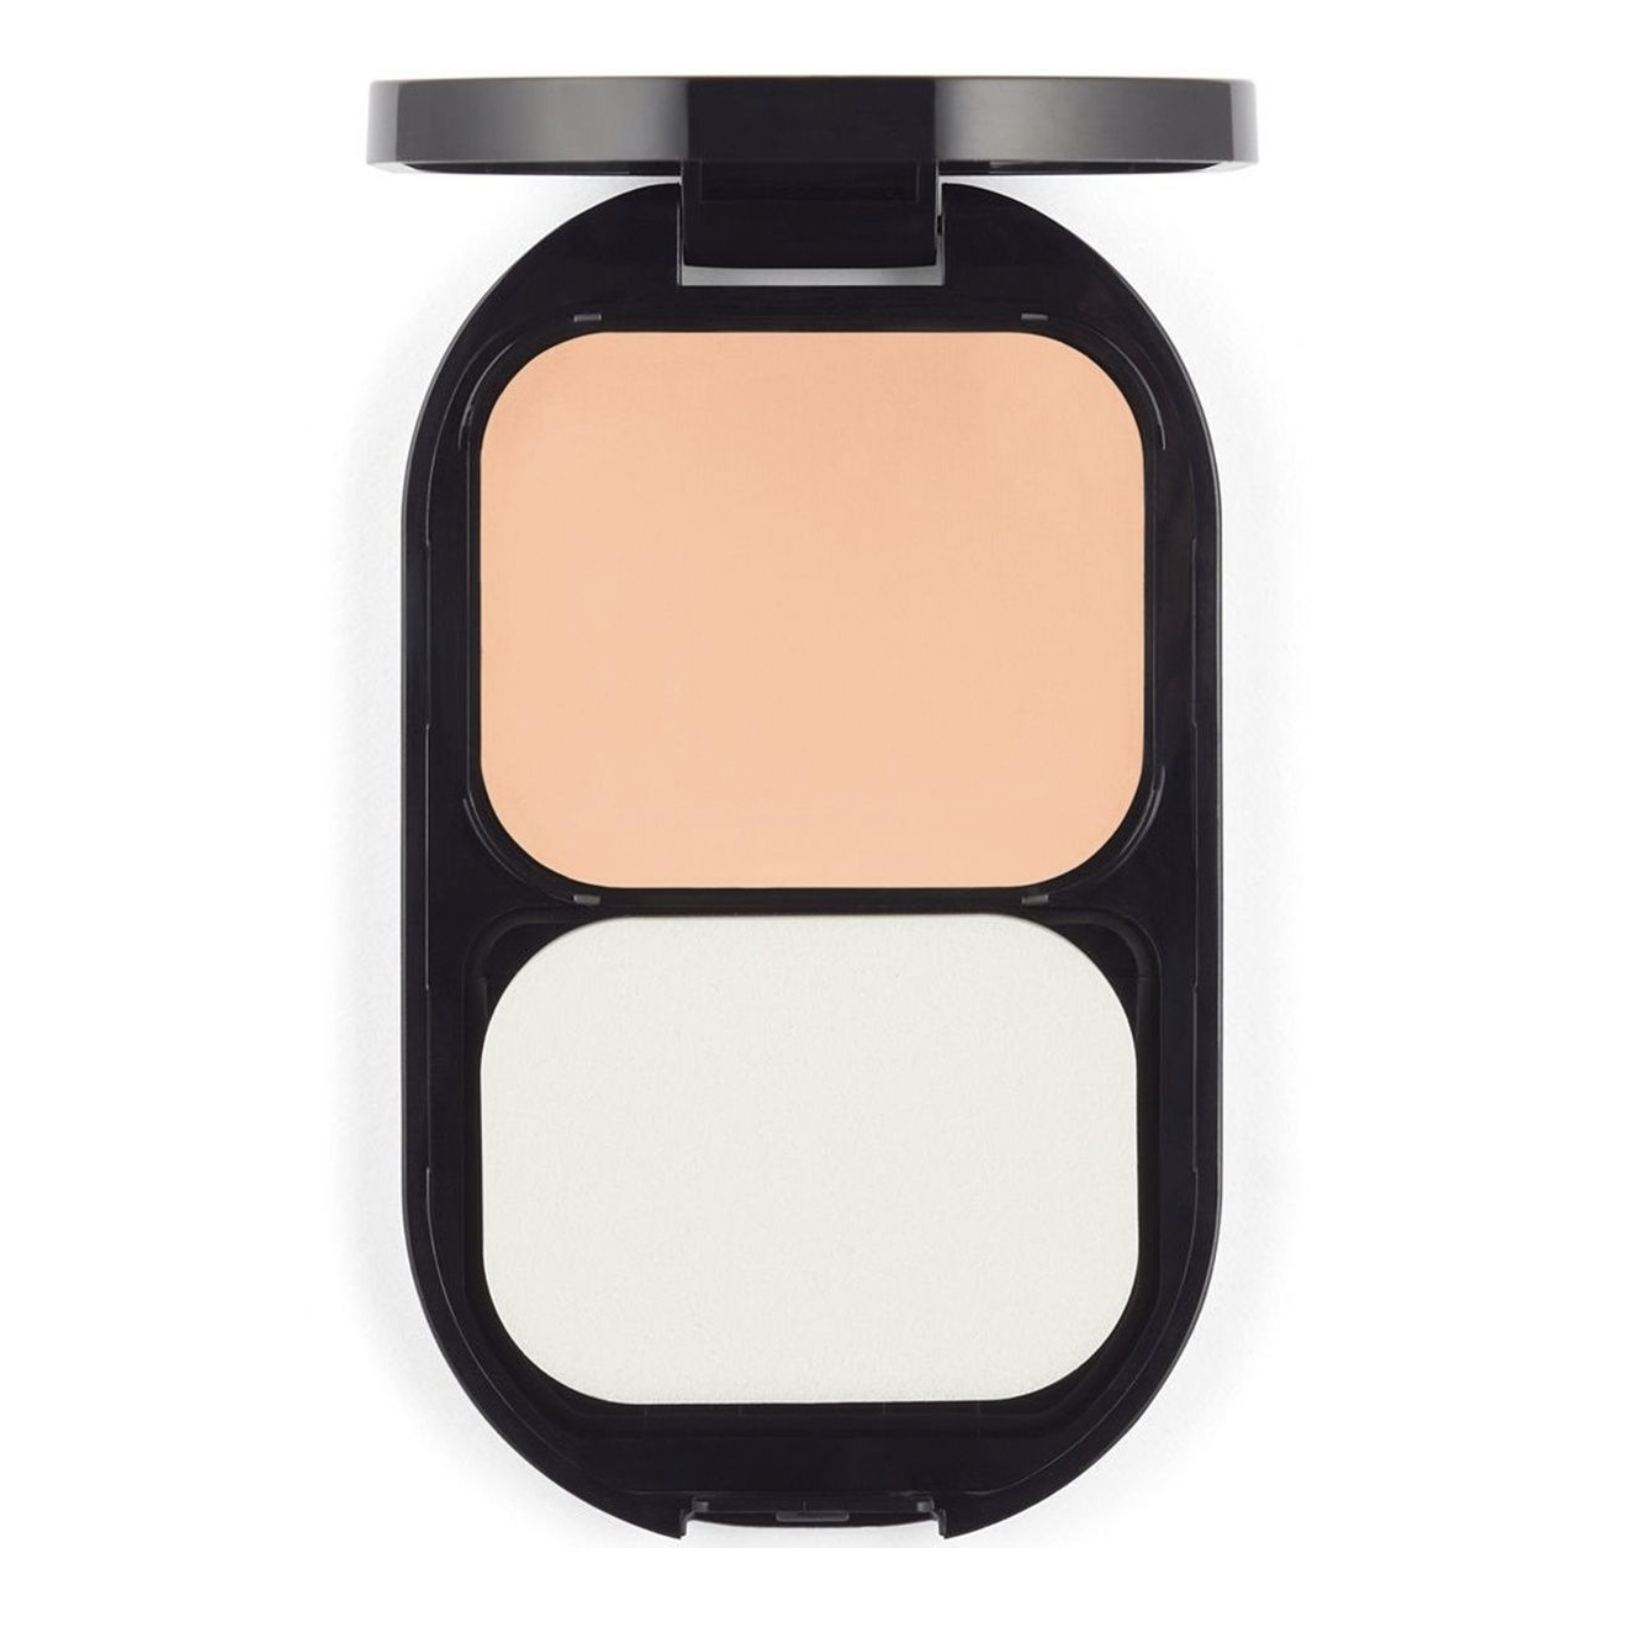    / Max Factor     Facefinity Compact Foundation 001 Porcelain 10 